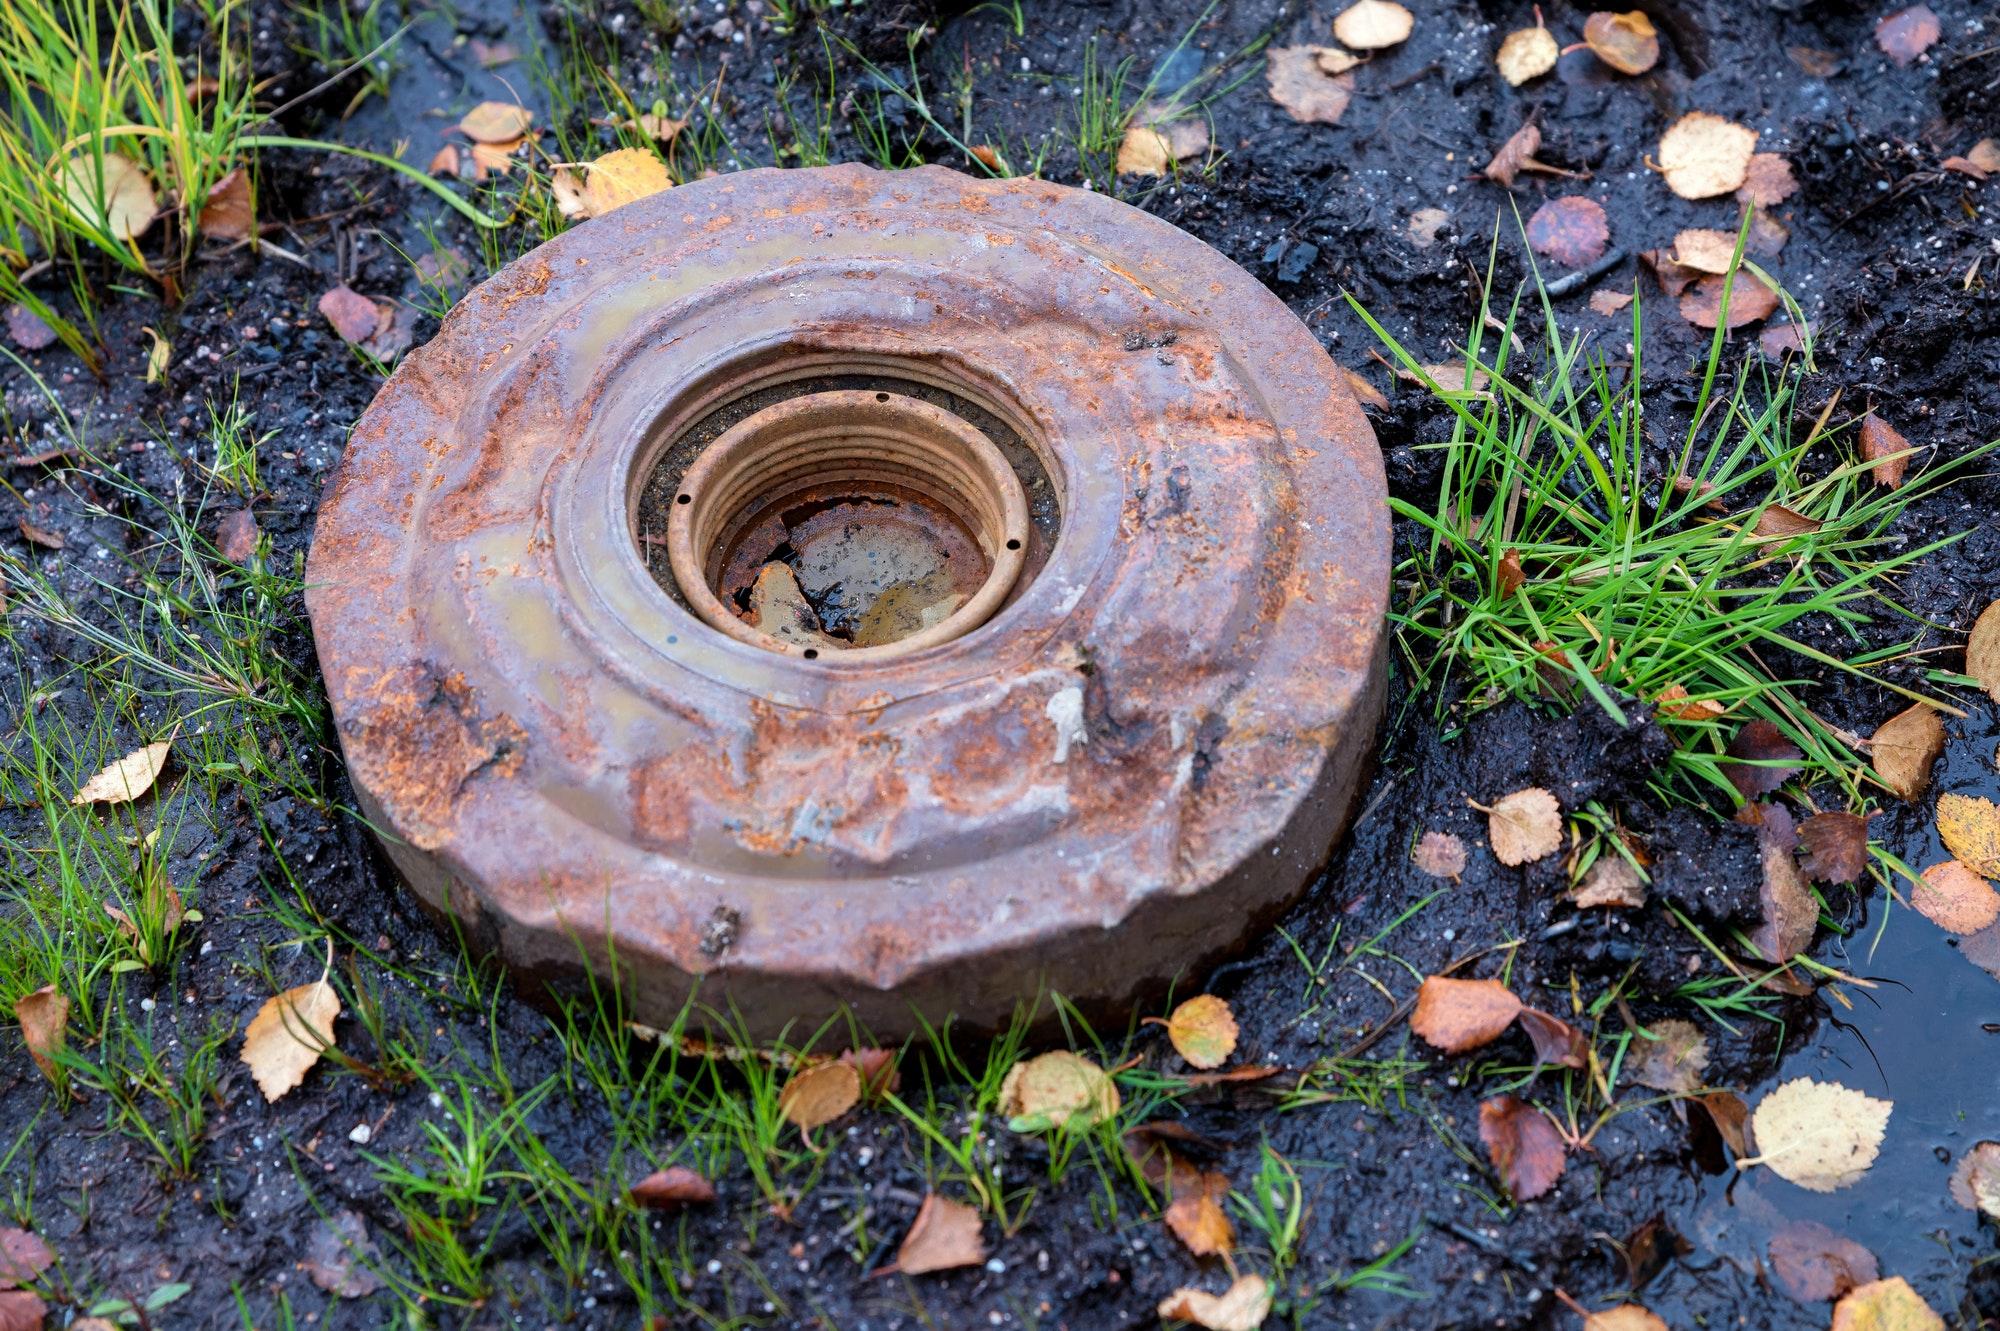 An old anti-personnel mine on the ground